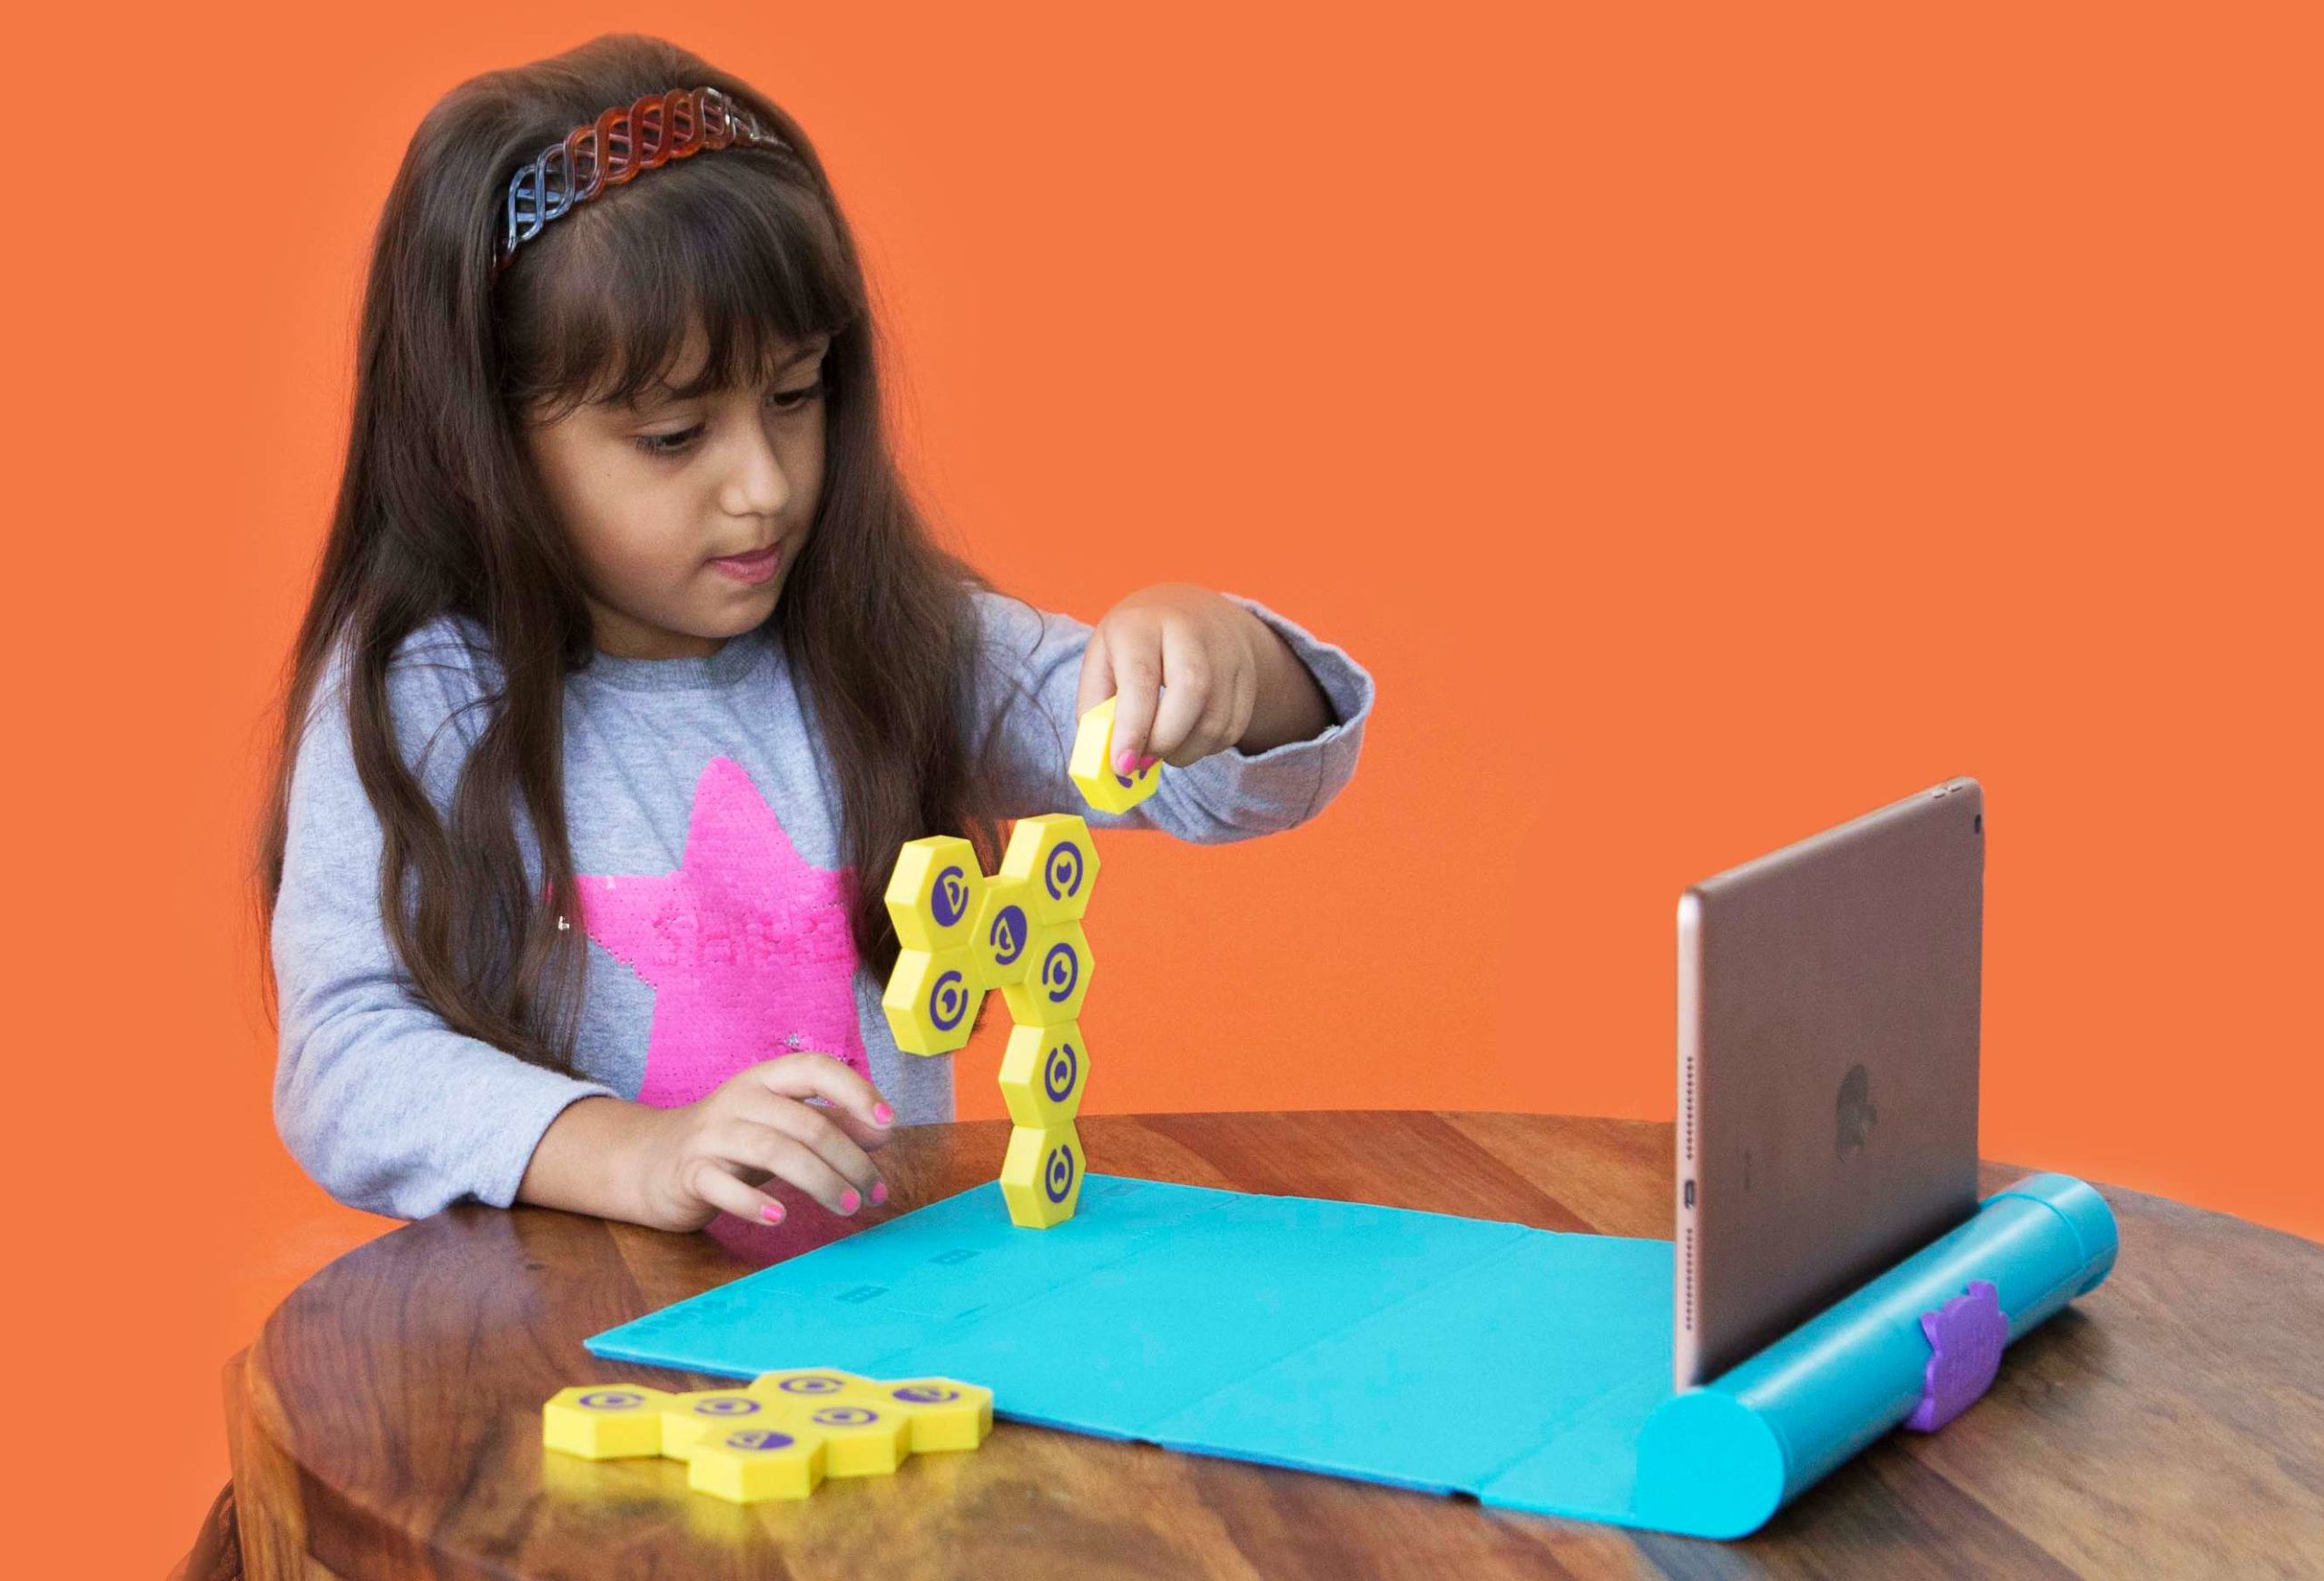 PlayShifu's Plugo Link combines interactive learning with smart devices